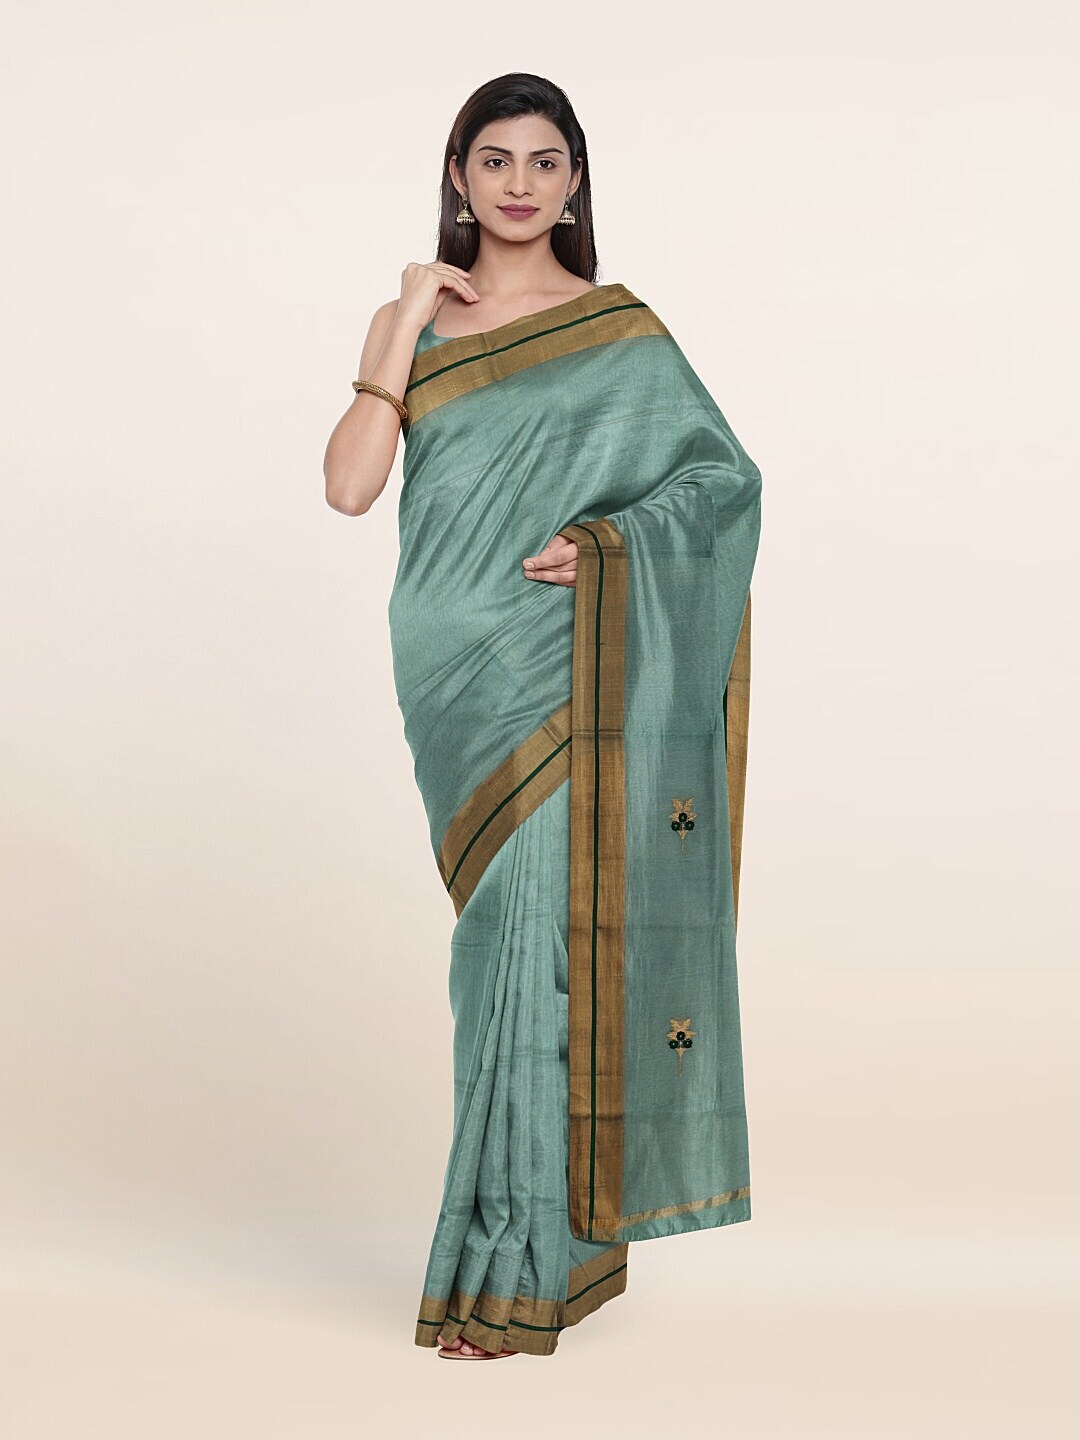 Pothys Blue & Green Floral Embroidered Silk Cotton Saree Price in India